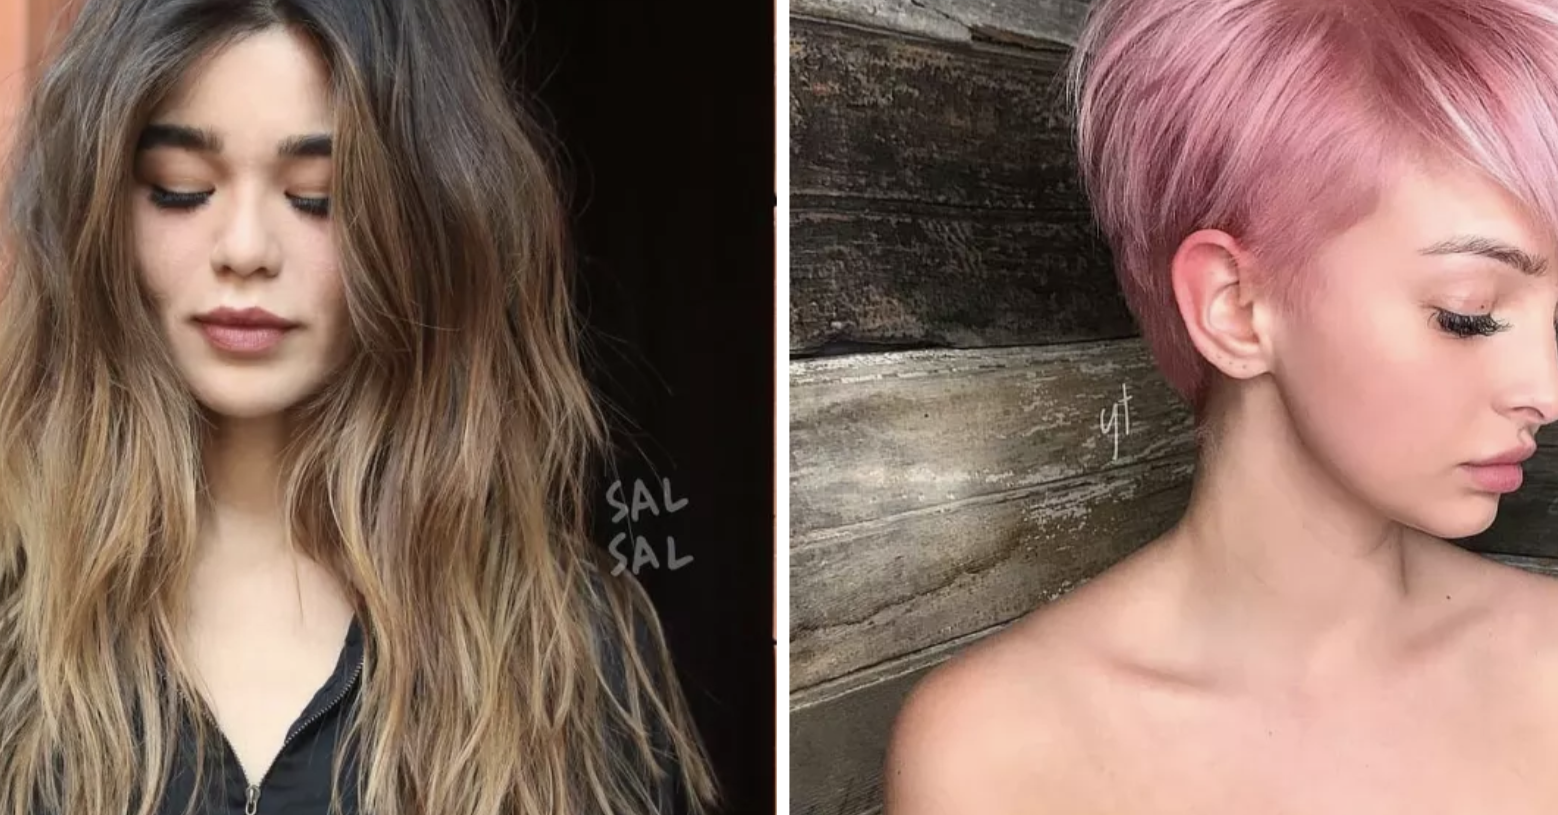 Change Your Hair Up In 2018 With One Of These On-Trend Cuts